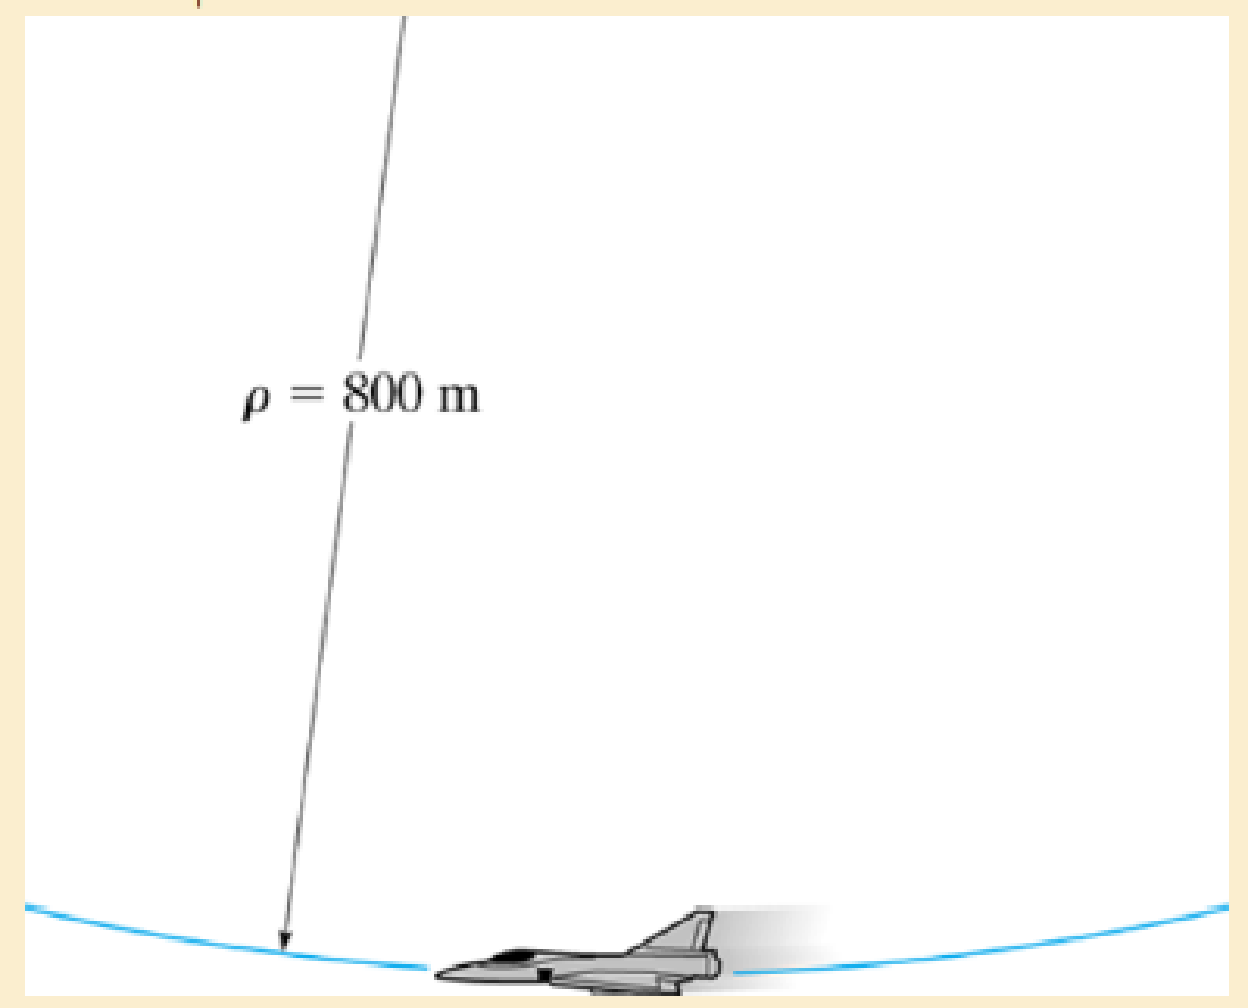 Chapter 13.5, Problem 55P, Determine the maximum constant speed at which the pilot can travel around the vertical curve having 